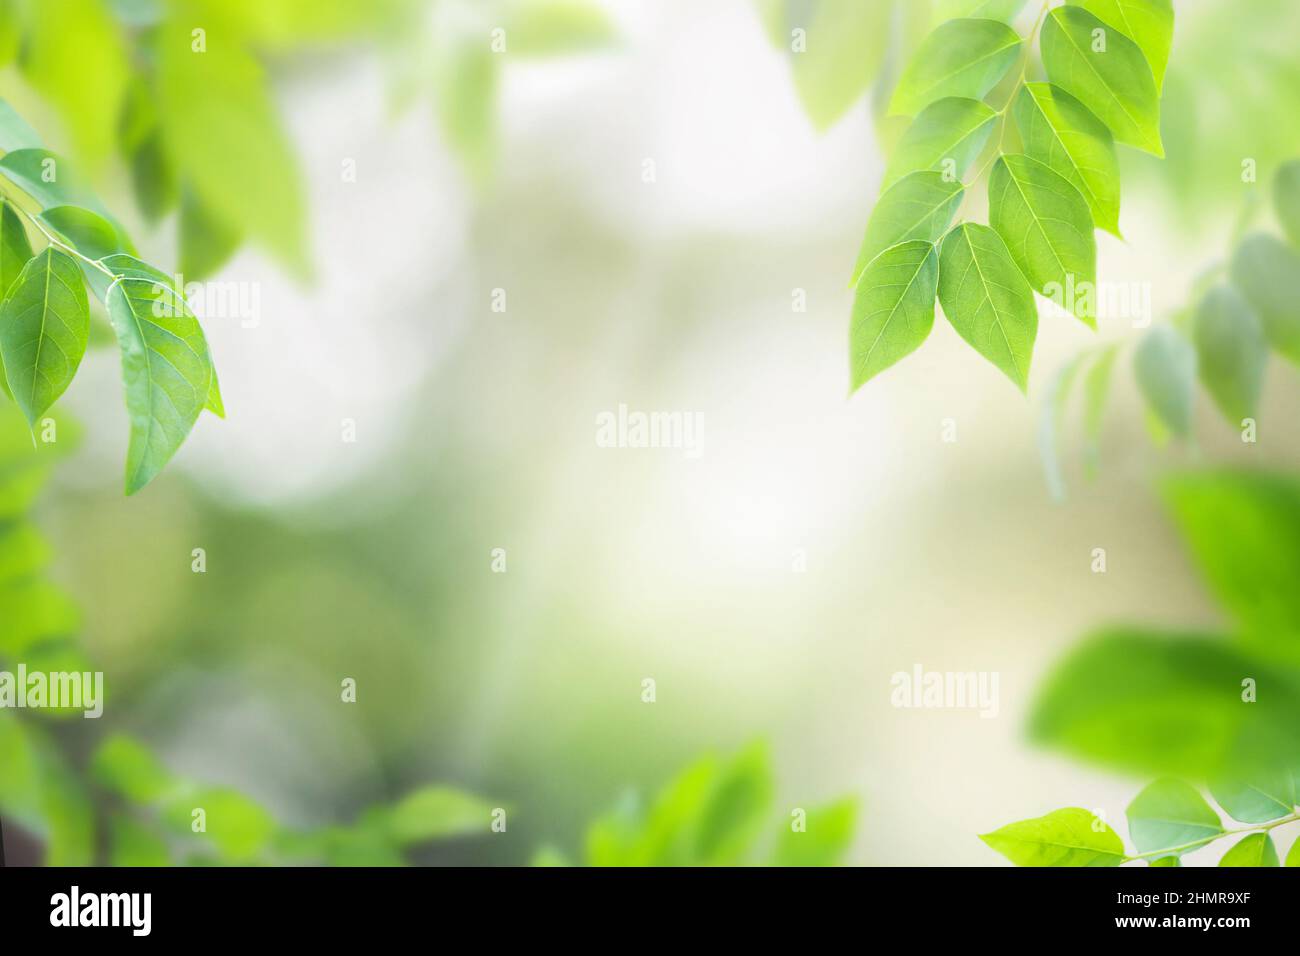 Nature fresh summer leaves abstract background Stock Photo